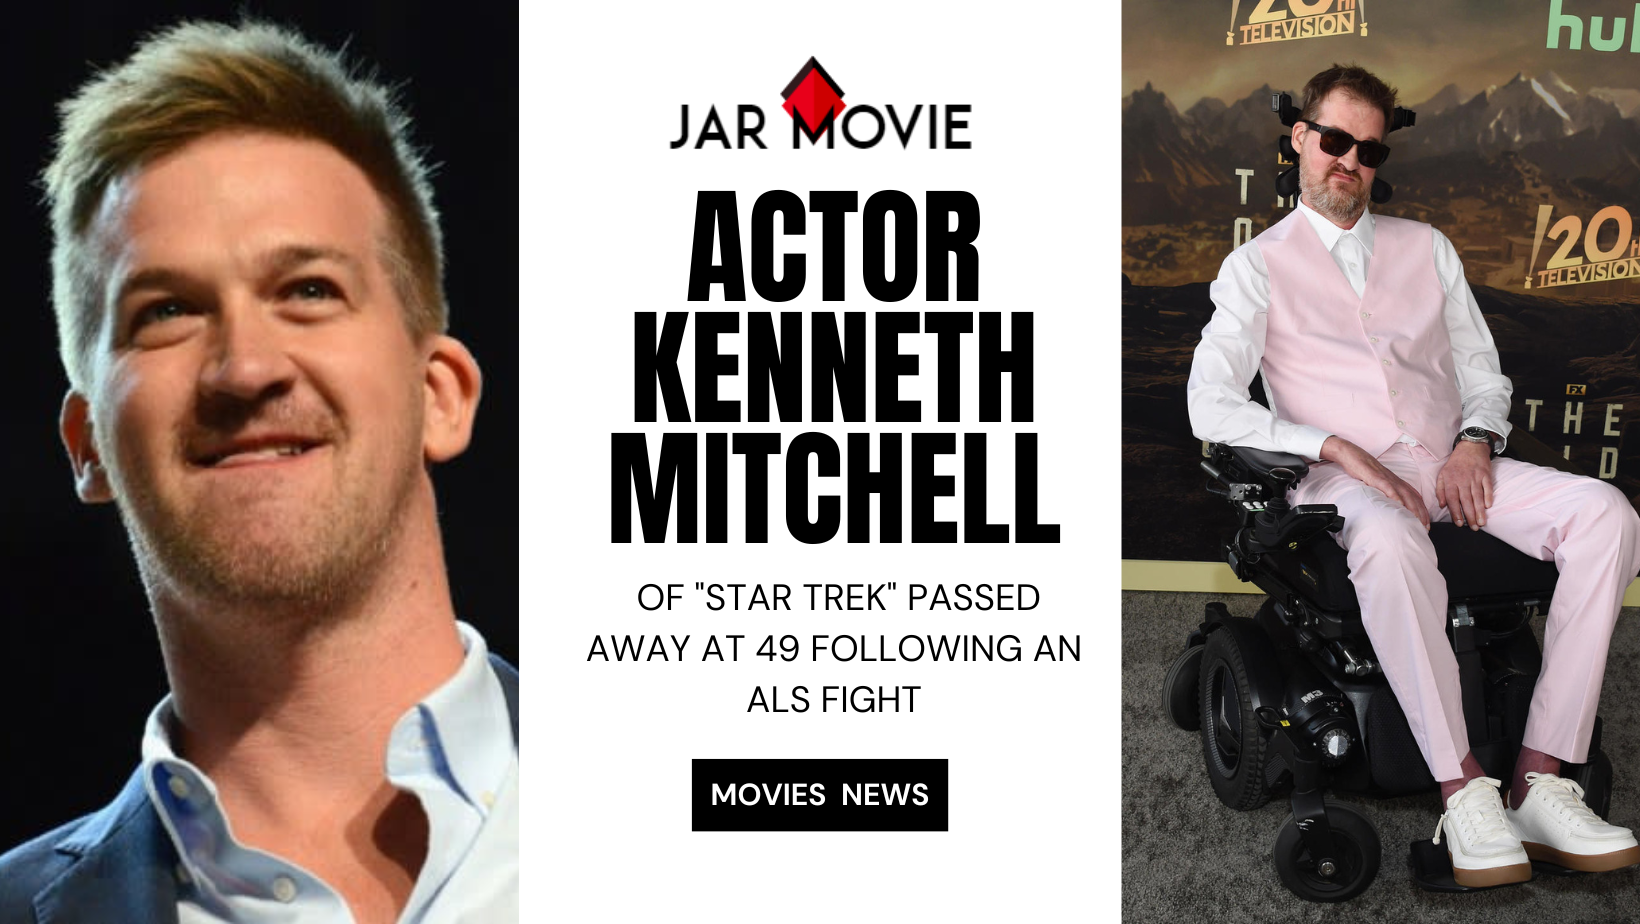 Actor Kenneth Mitchell of Star Trek passed away at 49 following an ALS fight